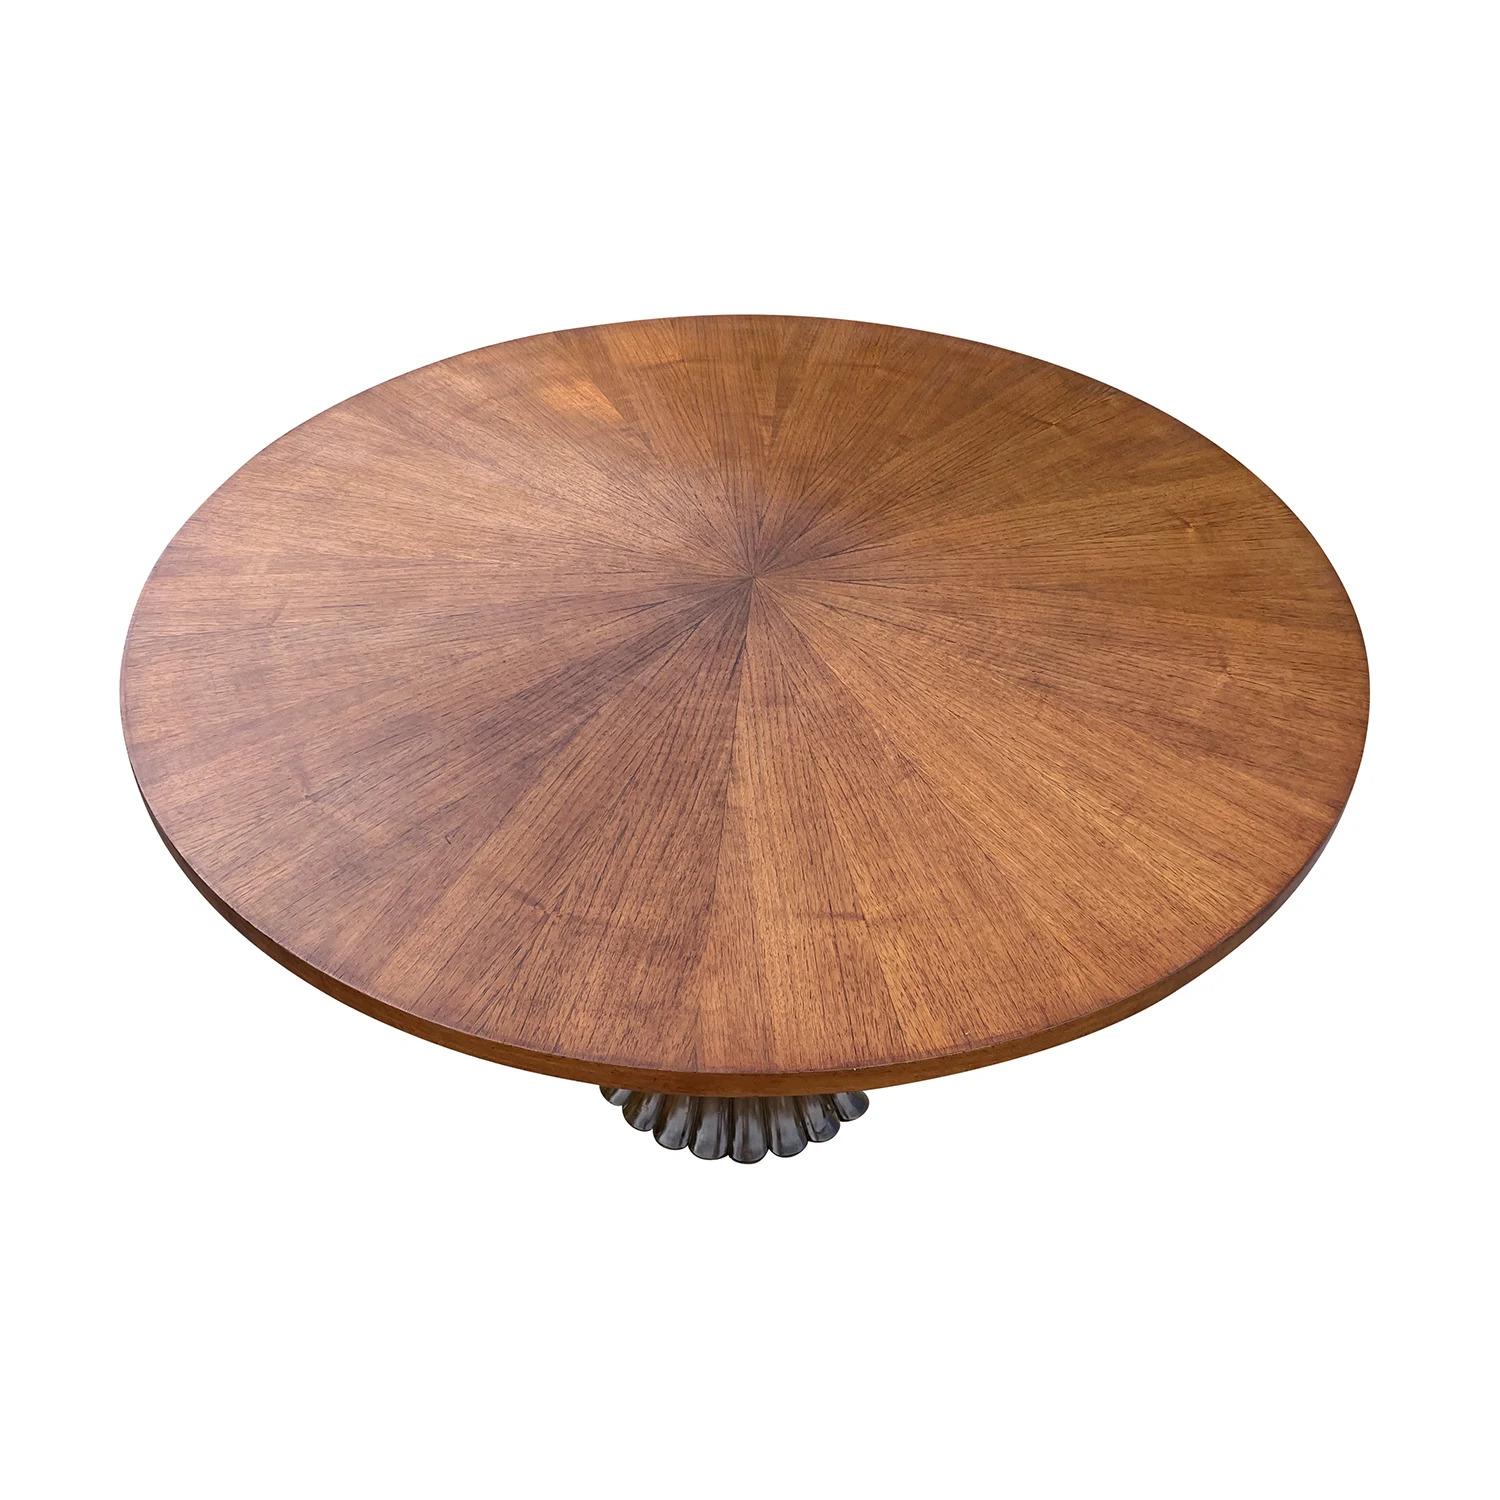 20th Century Italian Round Vintage Rosewood, Walnut Dining Room Table In Good Condition For Sale In West Palm Beach, FL